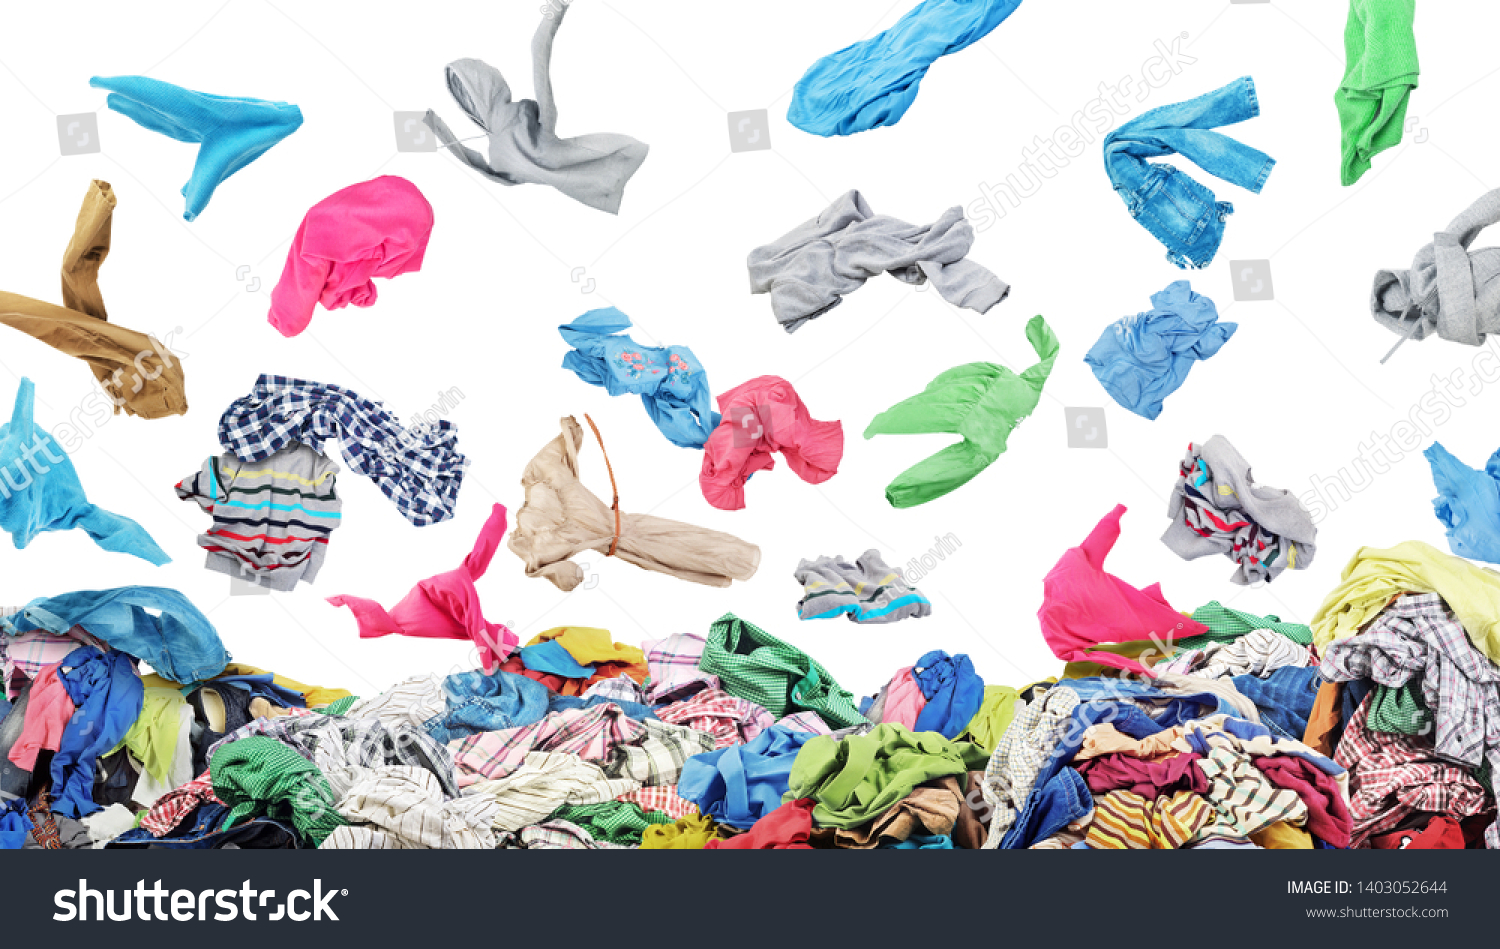 Separate clothing falling at the big pile of clothes on a white background #1403052644